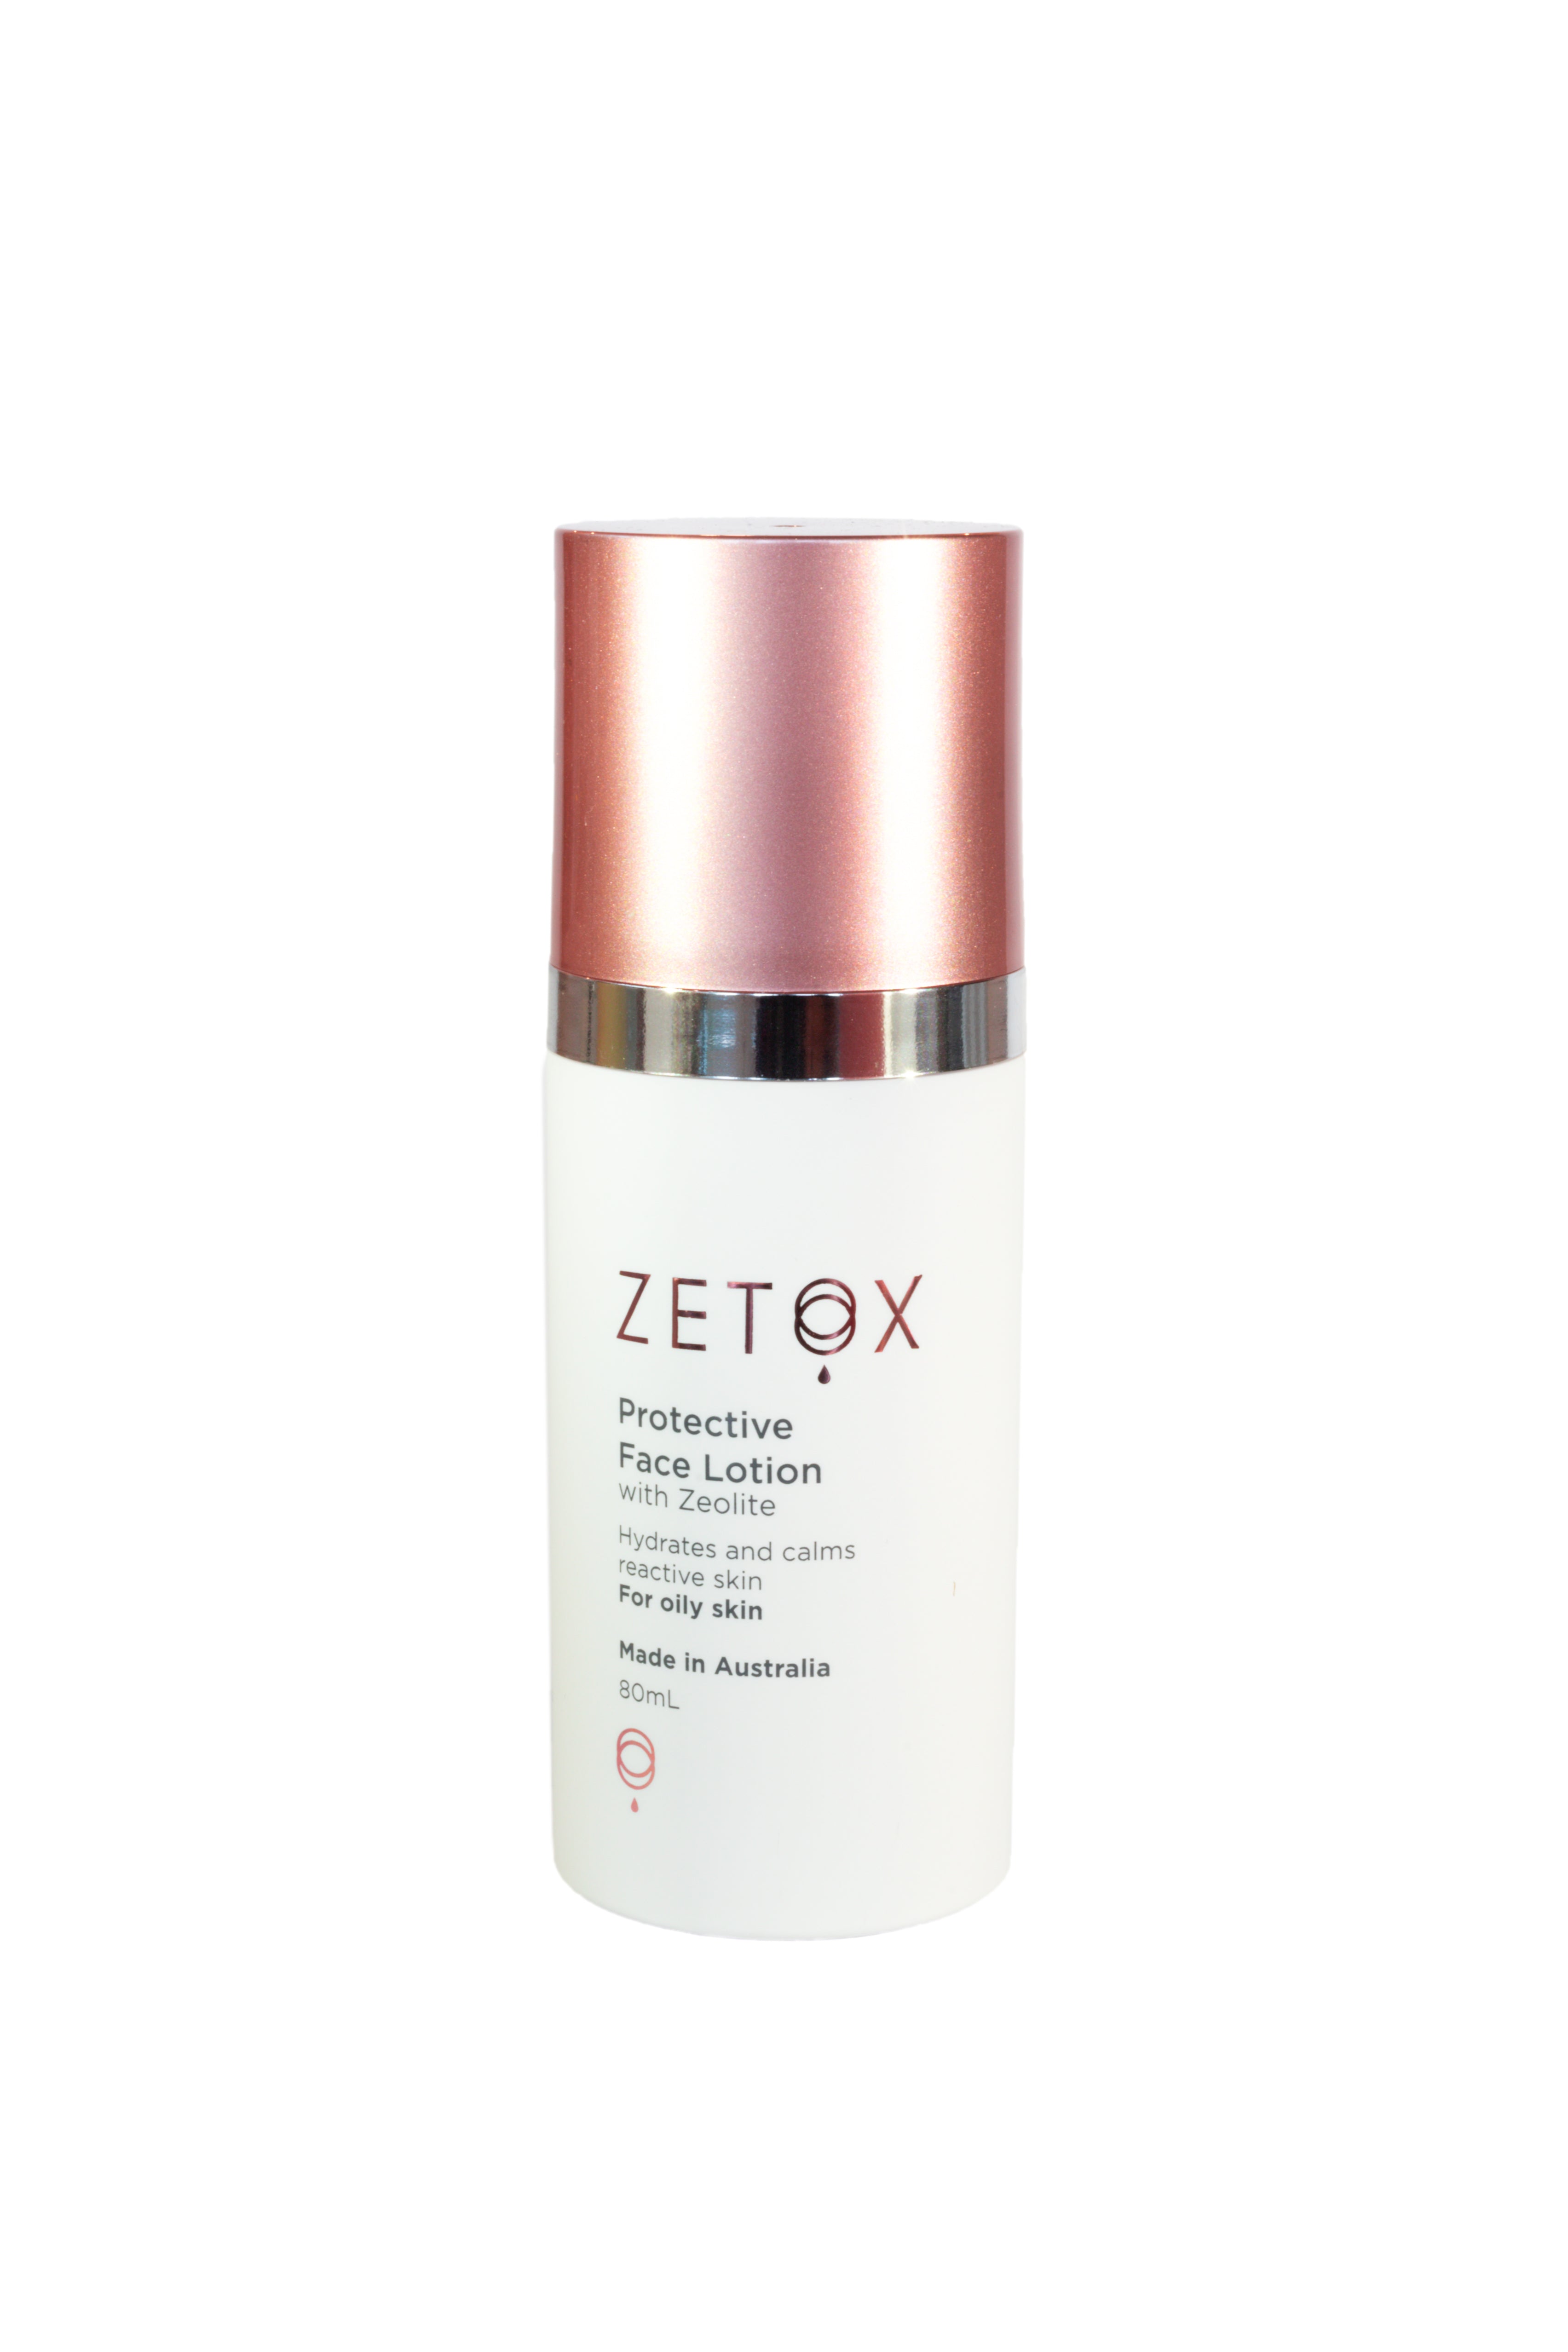 Zetox Protective Face Lotion 80g